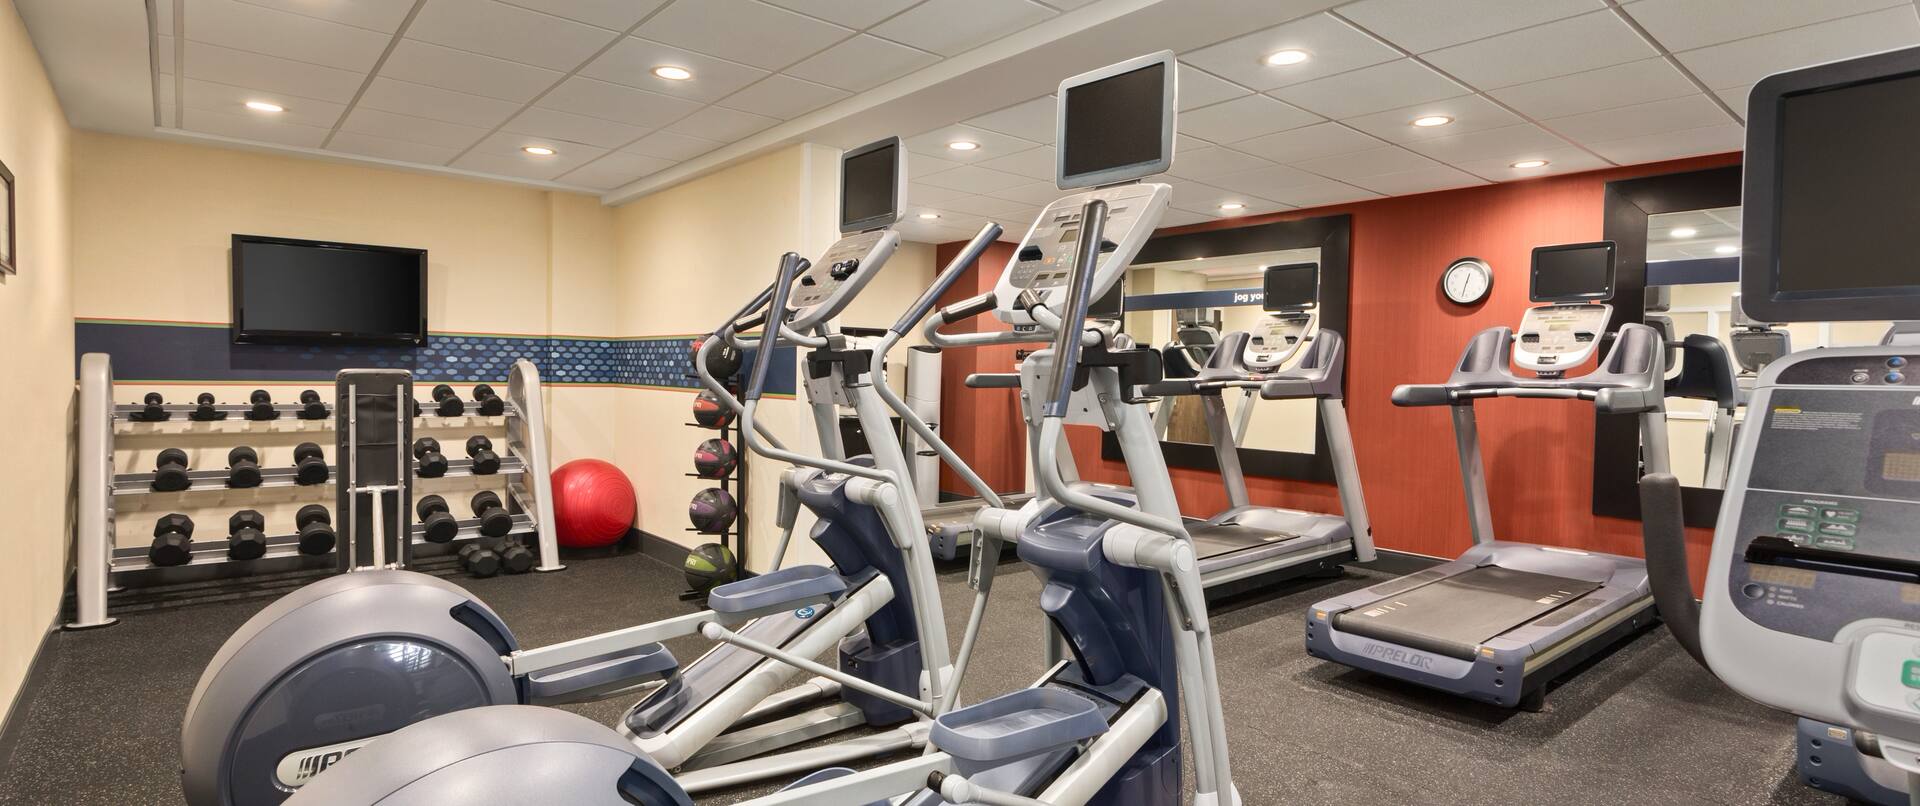 Fitness Center with Treadmills, Cross-Trainers and Weight Racks